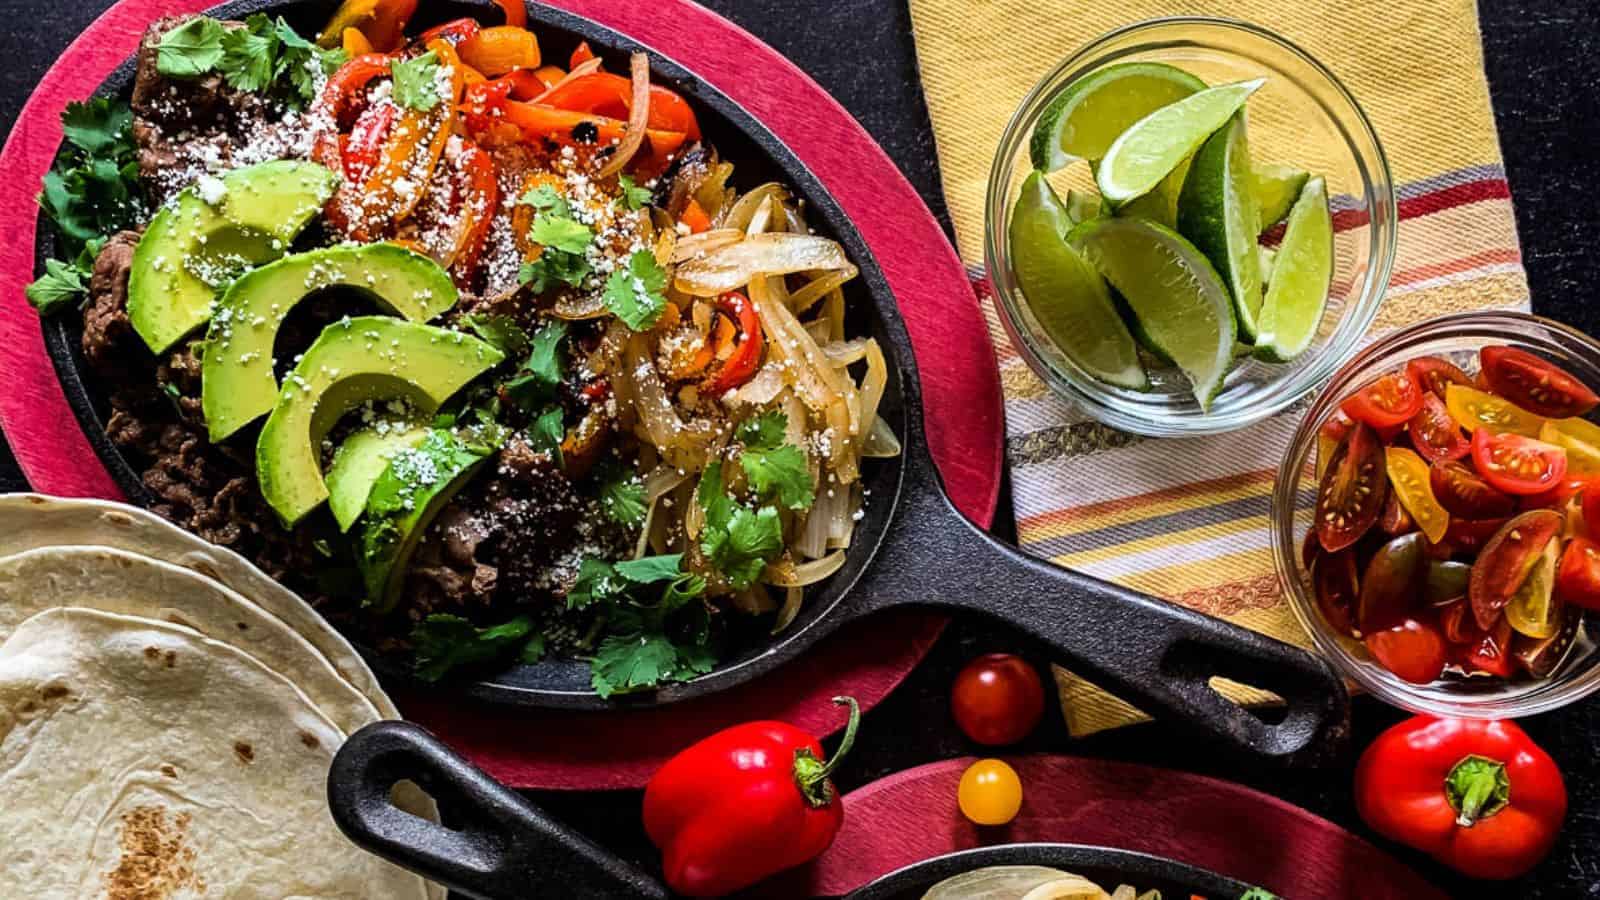 A cast iron skillet with hot beef fajitas and seared vegetables alongside bowls of lime wedges, tomatoes, and tortillas.